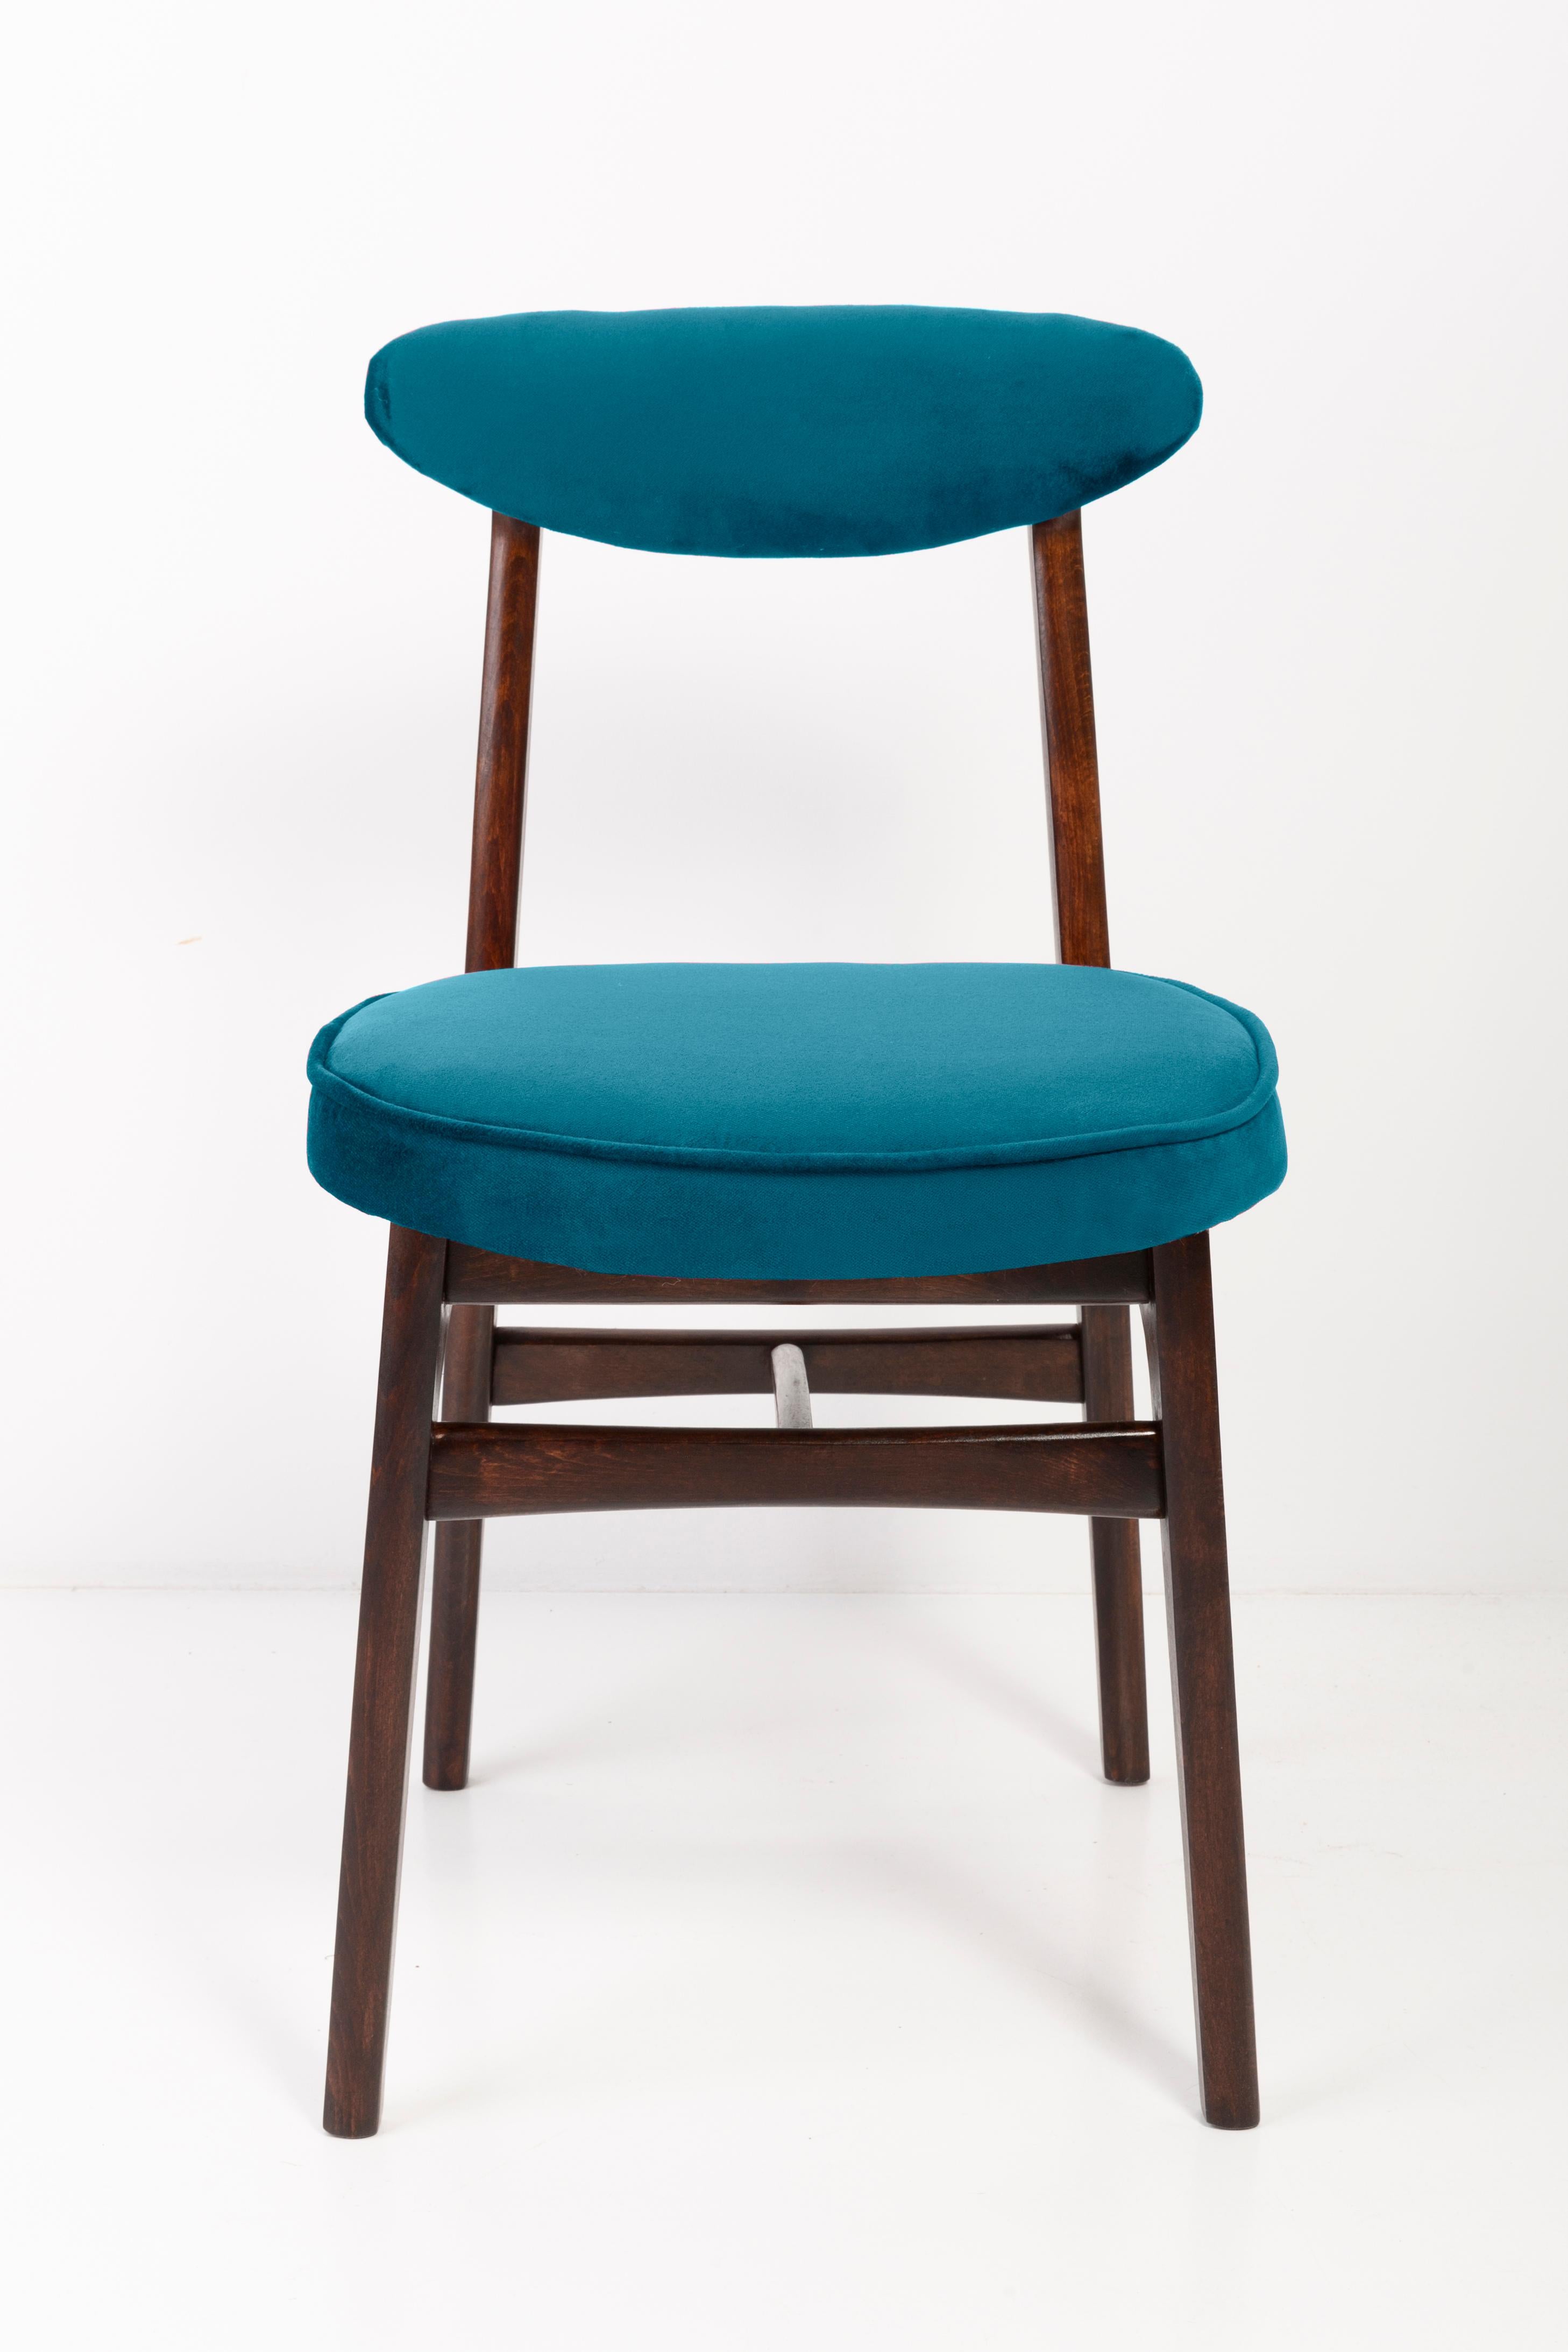 Hand-Crafted Twelve 20th Century Petrol Blue Velvet Chairs by Rajmund Halas Europe, 1960s For Sale